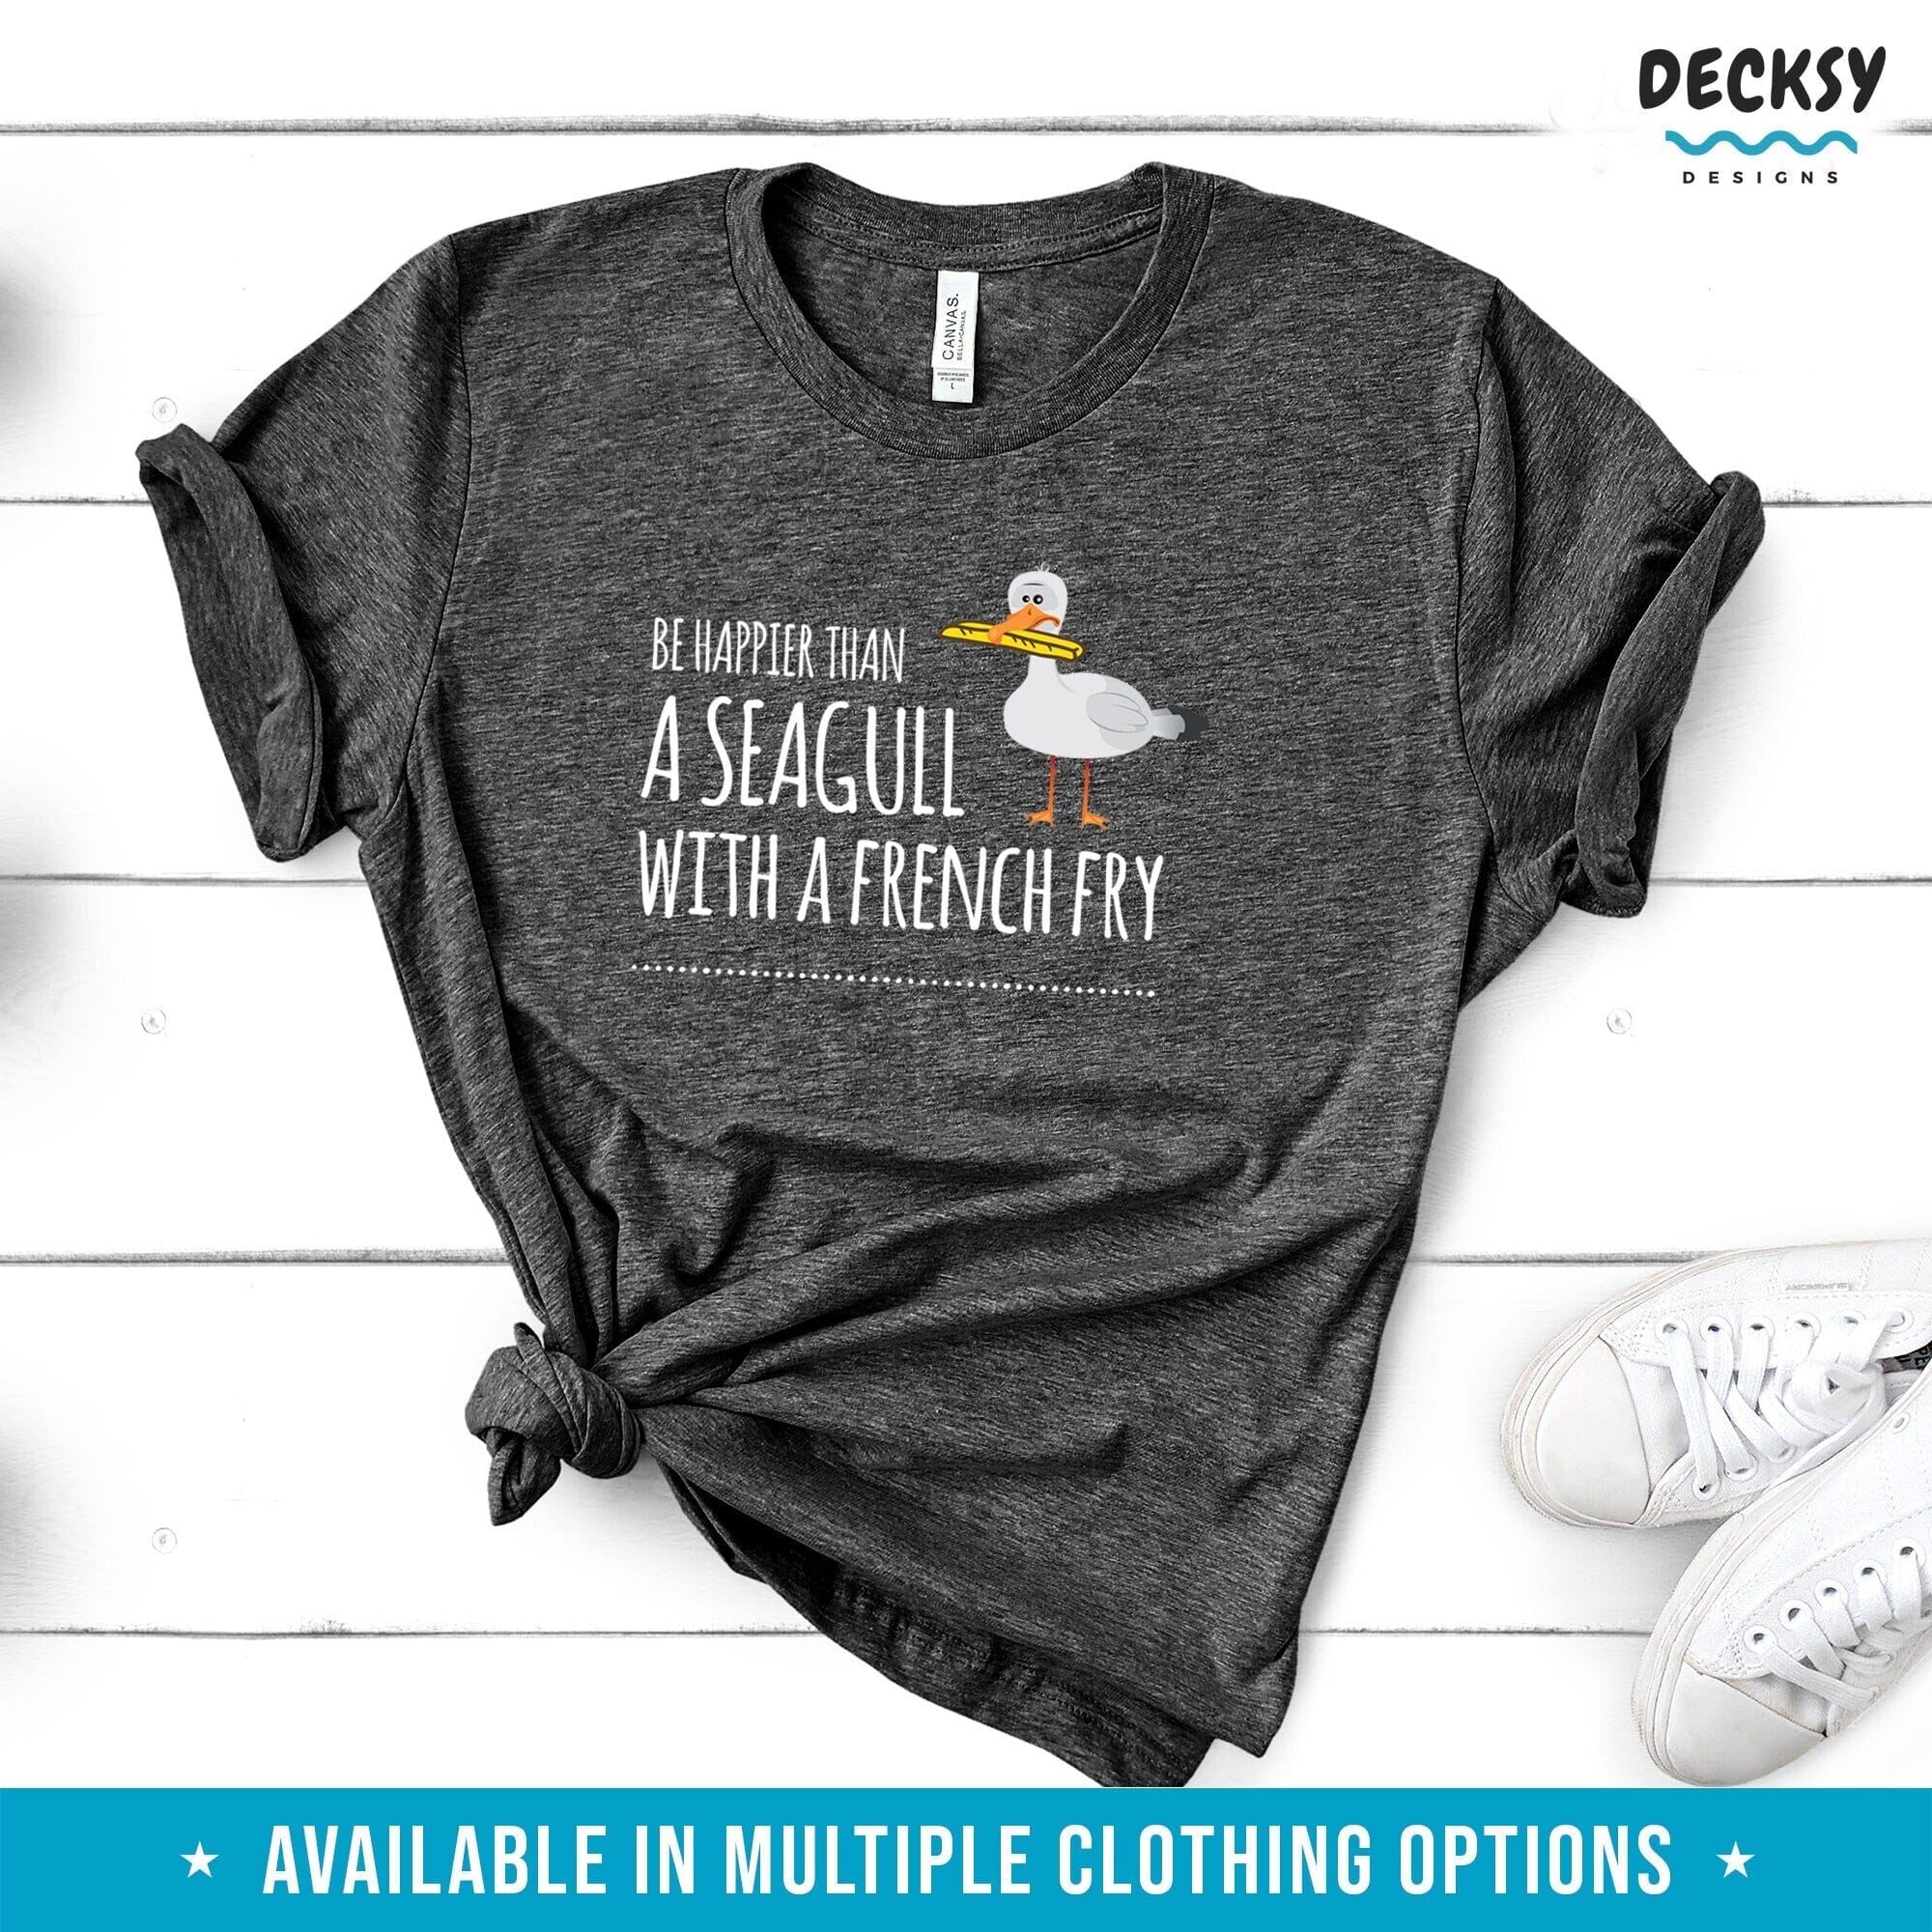 Funny seagulls shirt, Beach Lover Gift-Clothing:Gender-Neutral Adult Clothing:Tops & Tees:T-shirts:Graphic Tees-DecksyDesigns